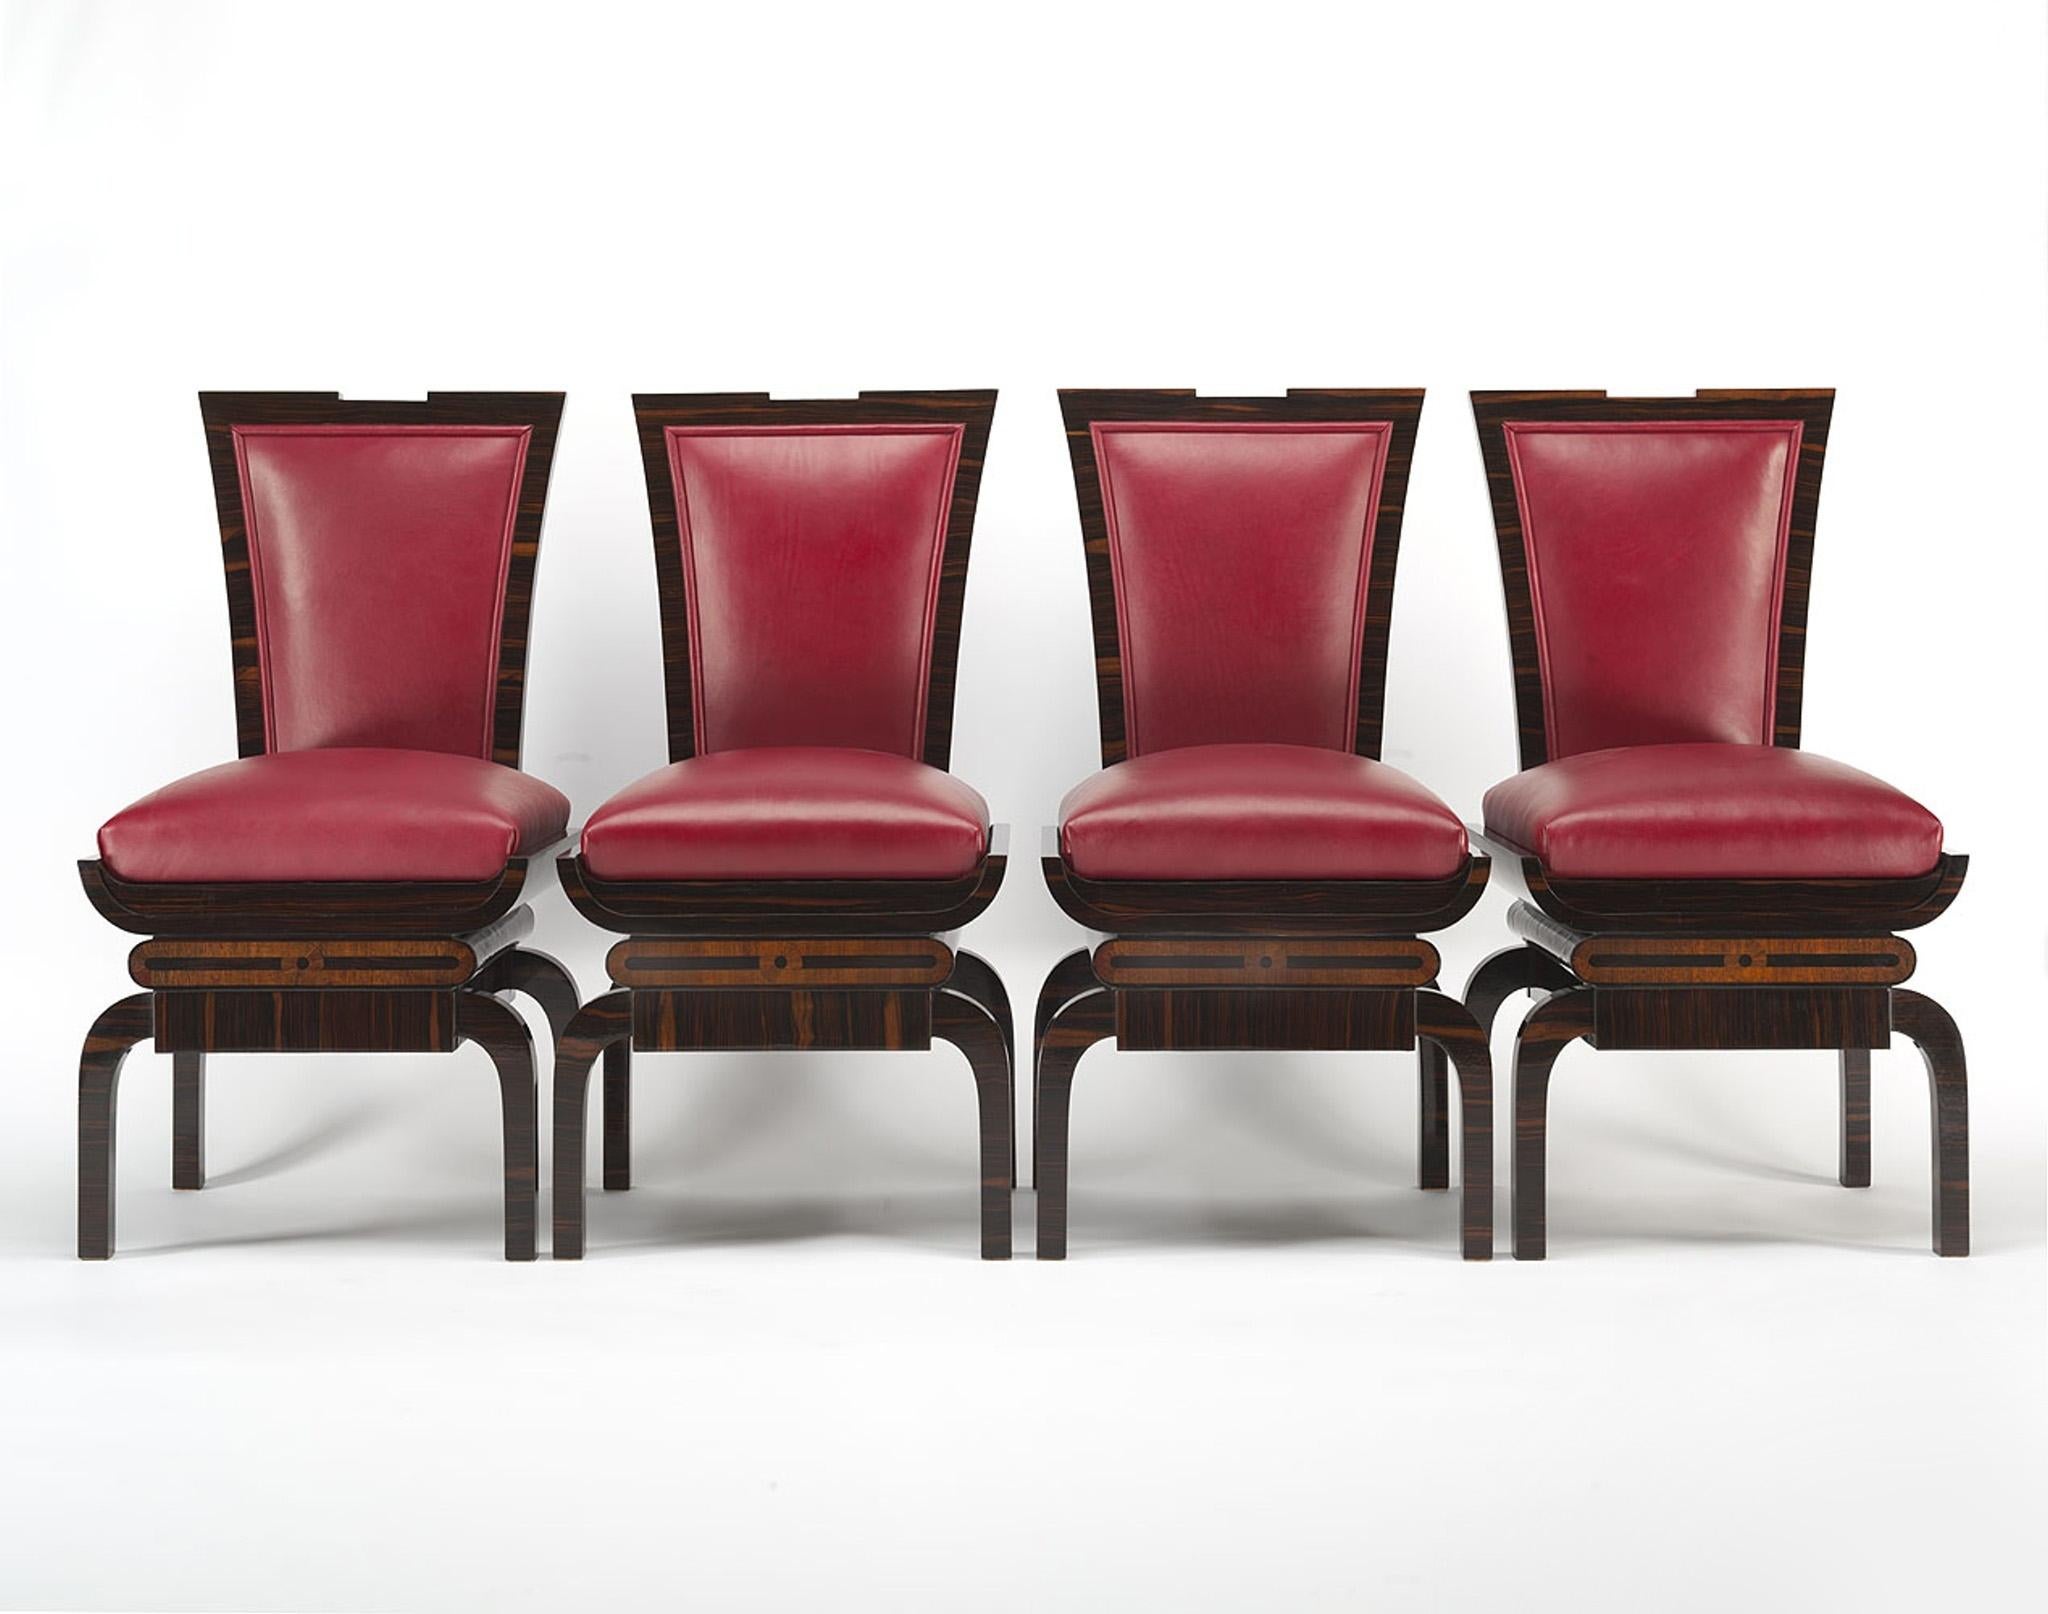 Art Deco chairs from Czechoslovakia, 1920-1929 upholstery
Style: Art Deco.
Period: 1920-1929. 
Material: Makasar.